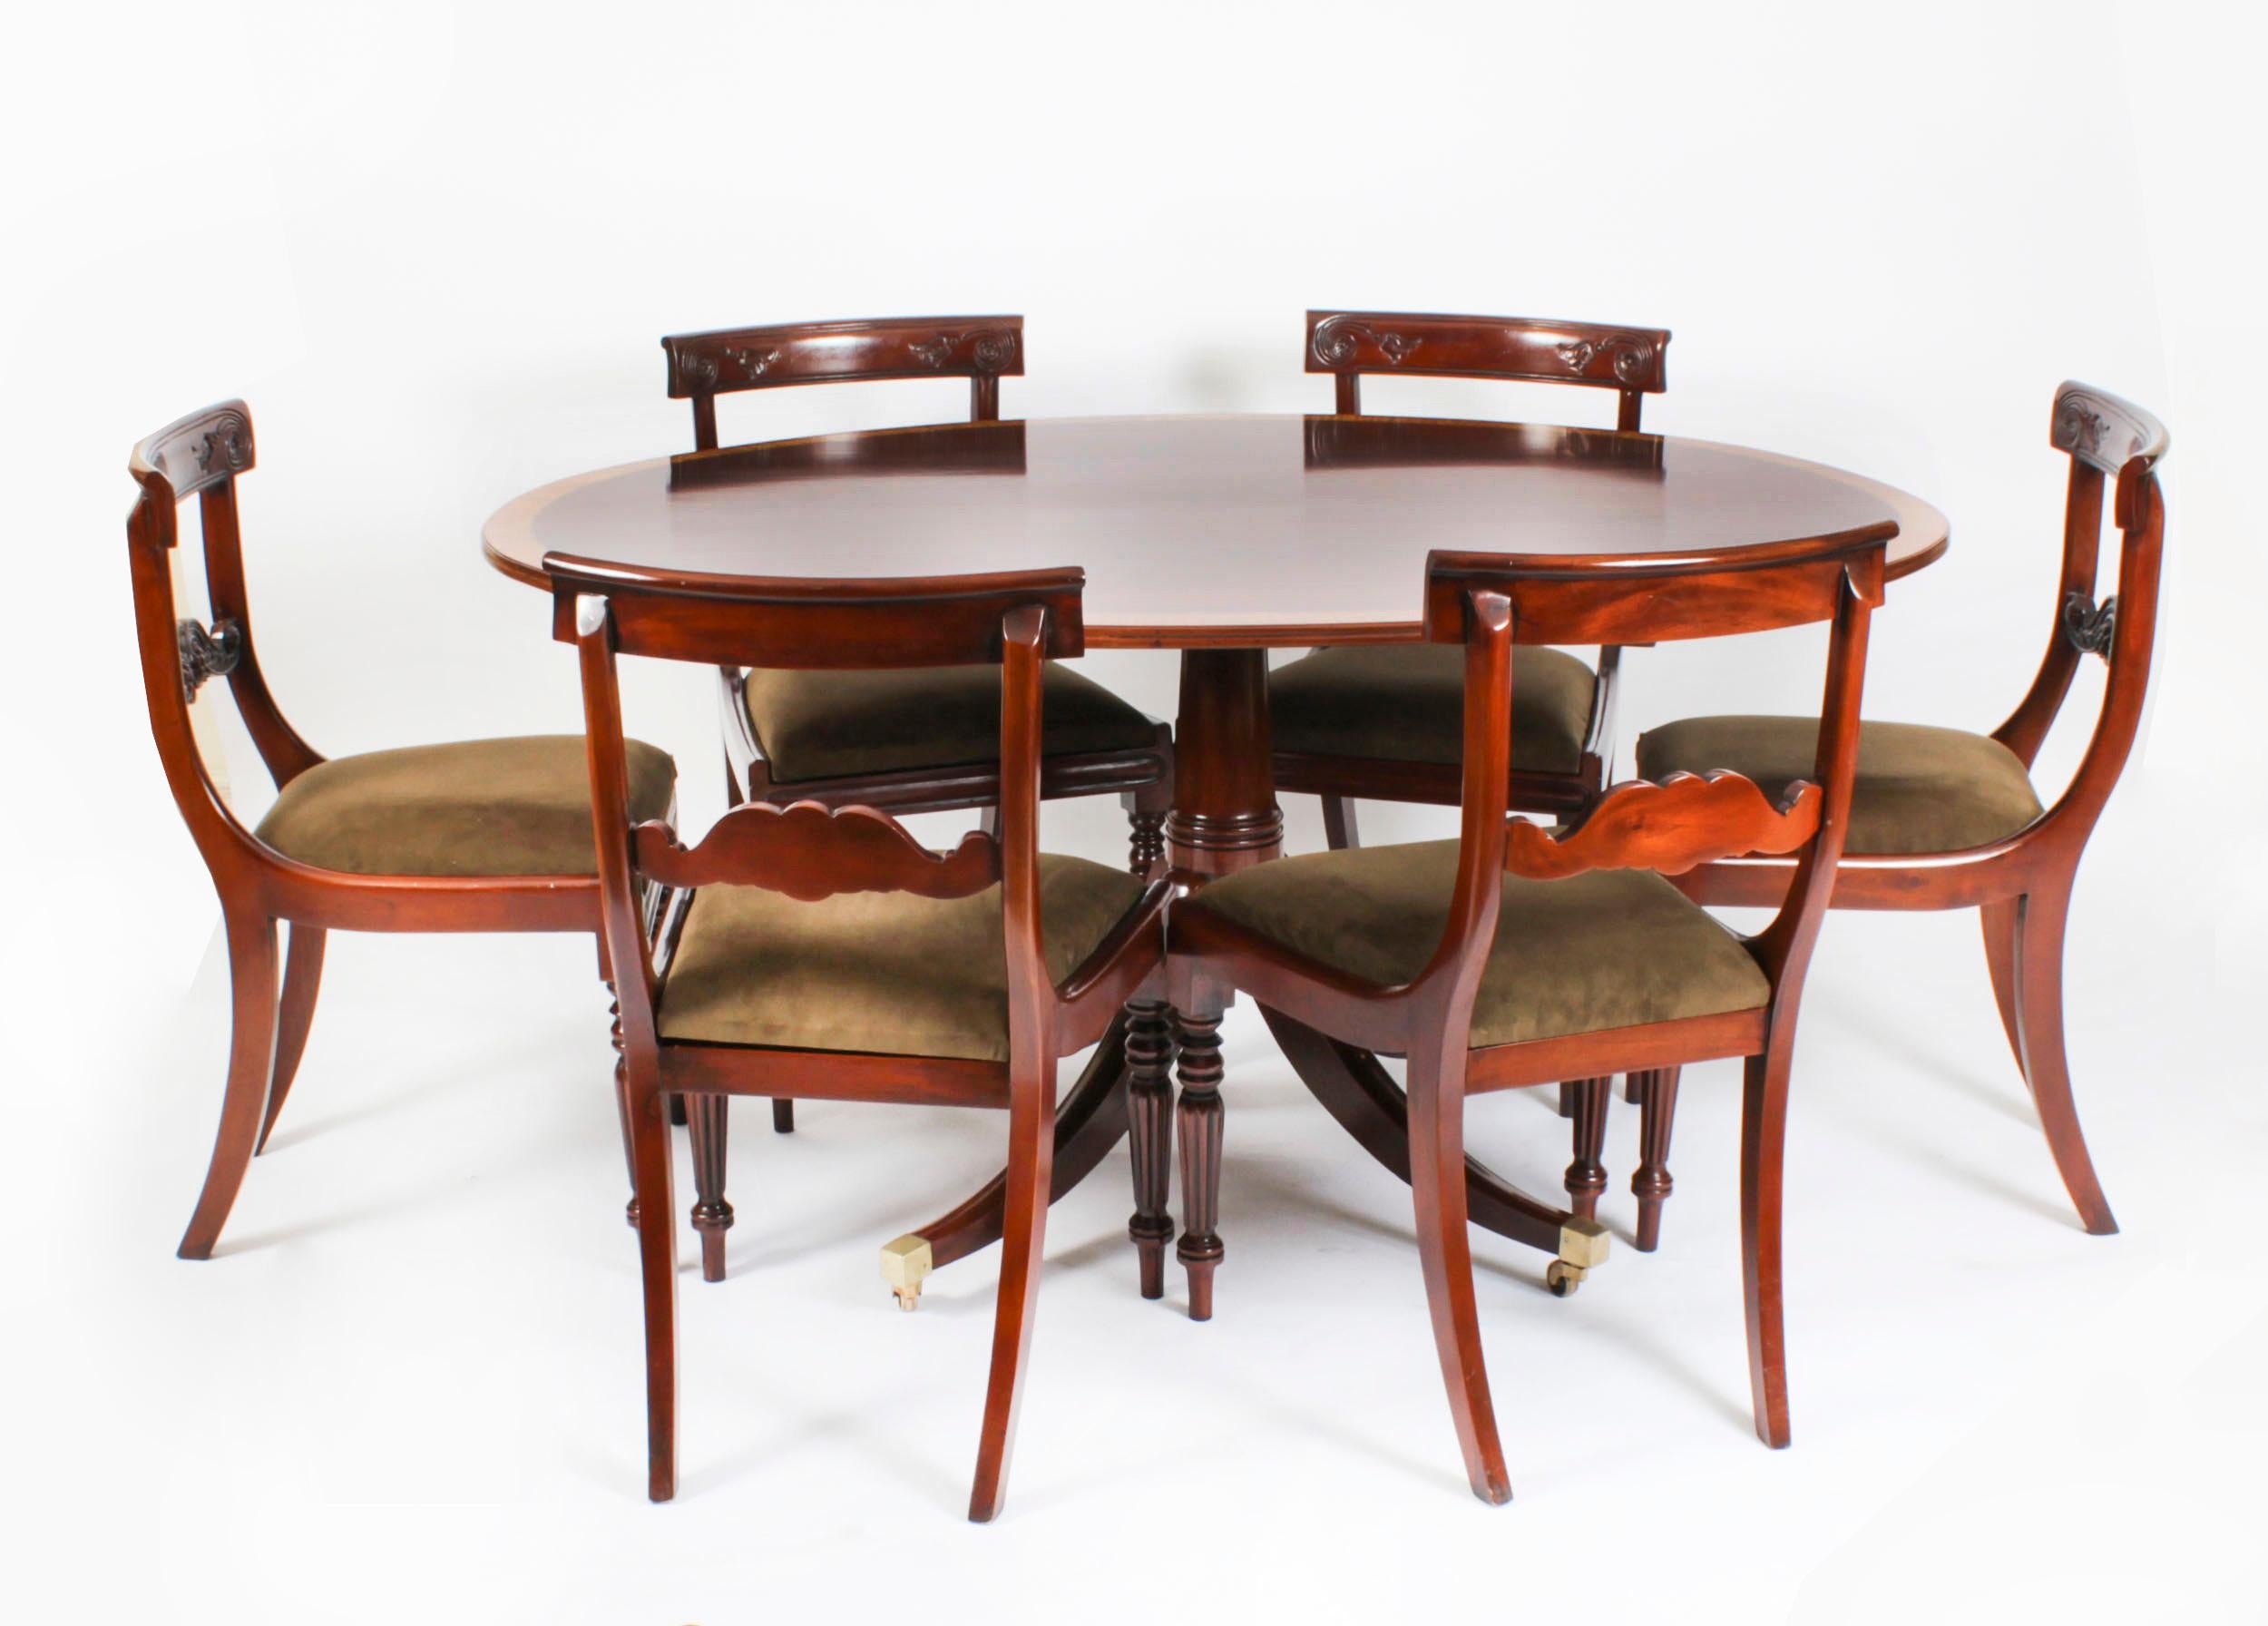 This is a beautiful antique Regency Revival flame mahogany and Satinwood banded oval dining table circa 1900 in date.
 
The fabulous 5ft flame mahogany tilt top table can seat six people in comfort. The top is decoratively crossbanded in satinwood